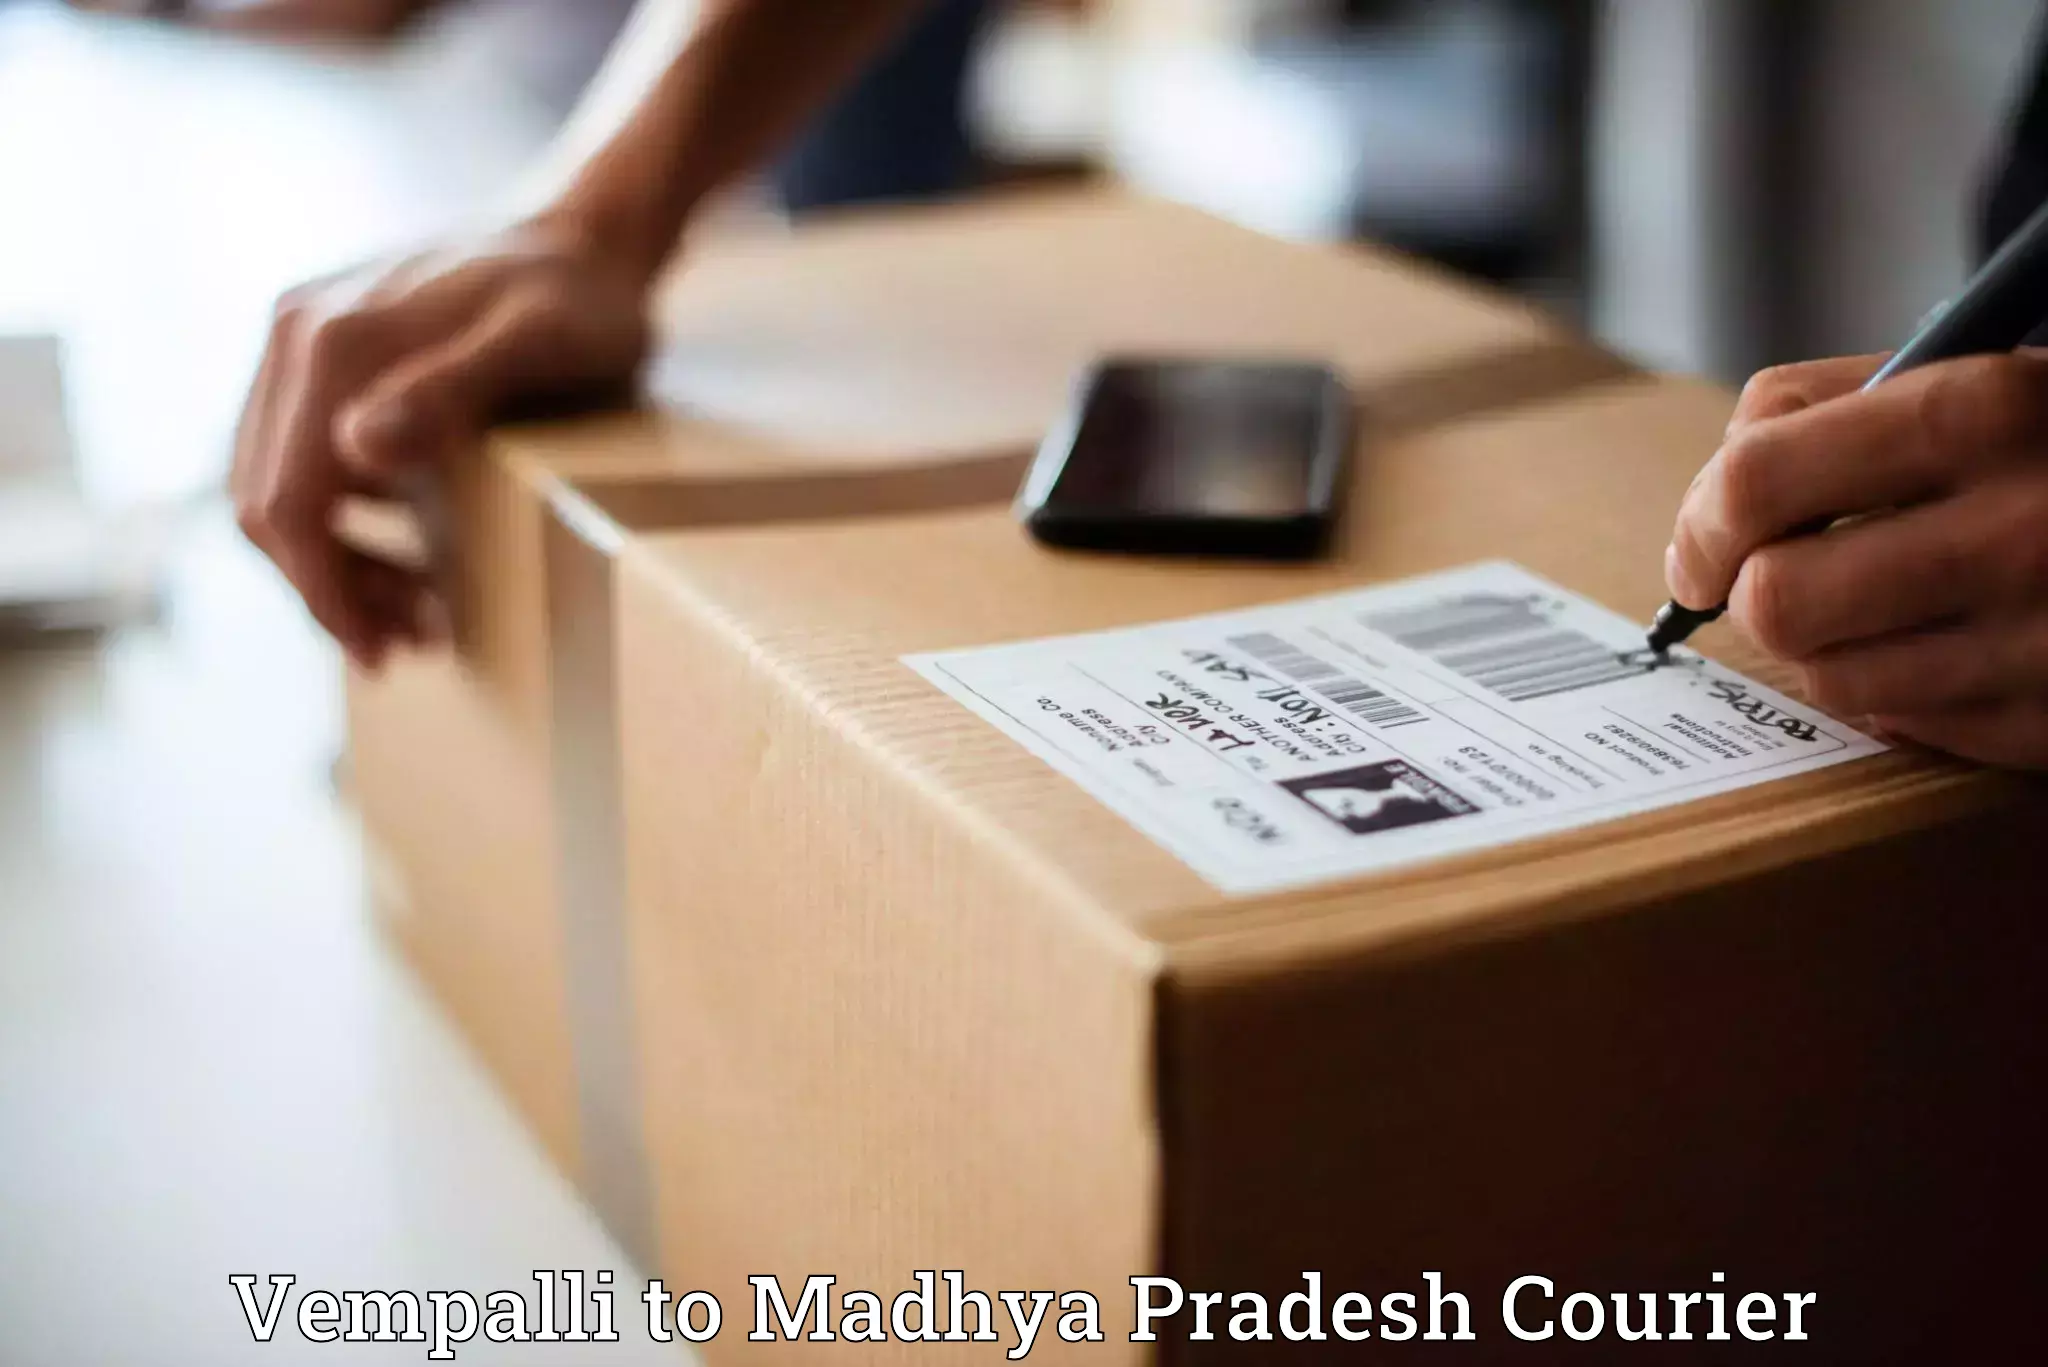 24/7 courier service in Vempalli to Mandideep